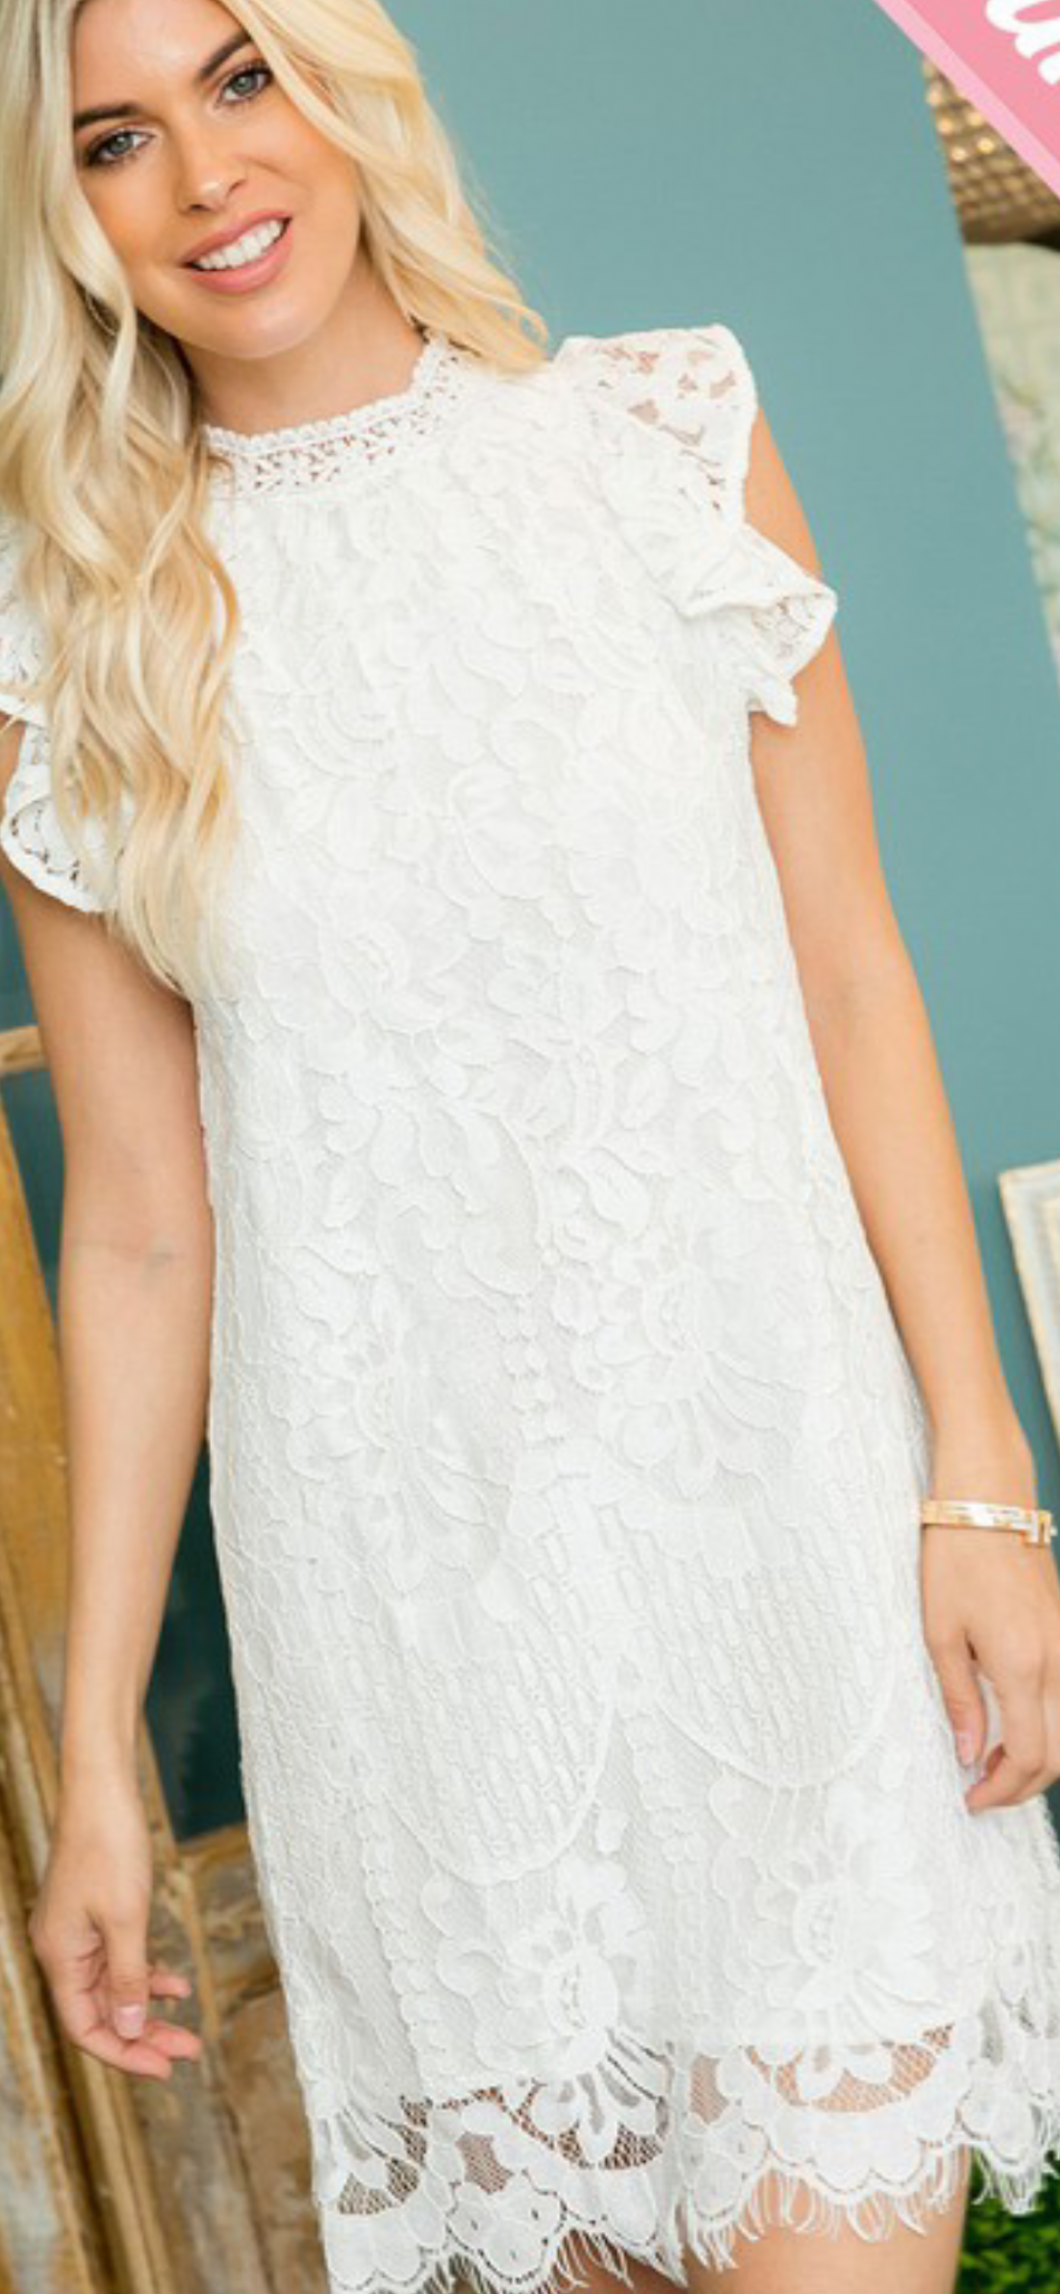 CURVY WHITE LACE DRESS WITH RUFFLED CAP SLEEVES